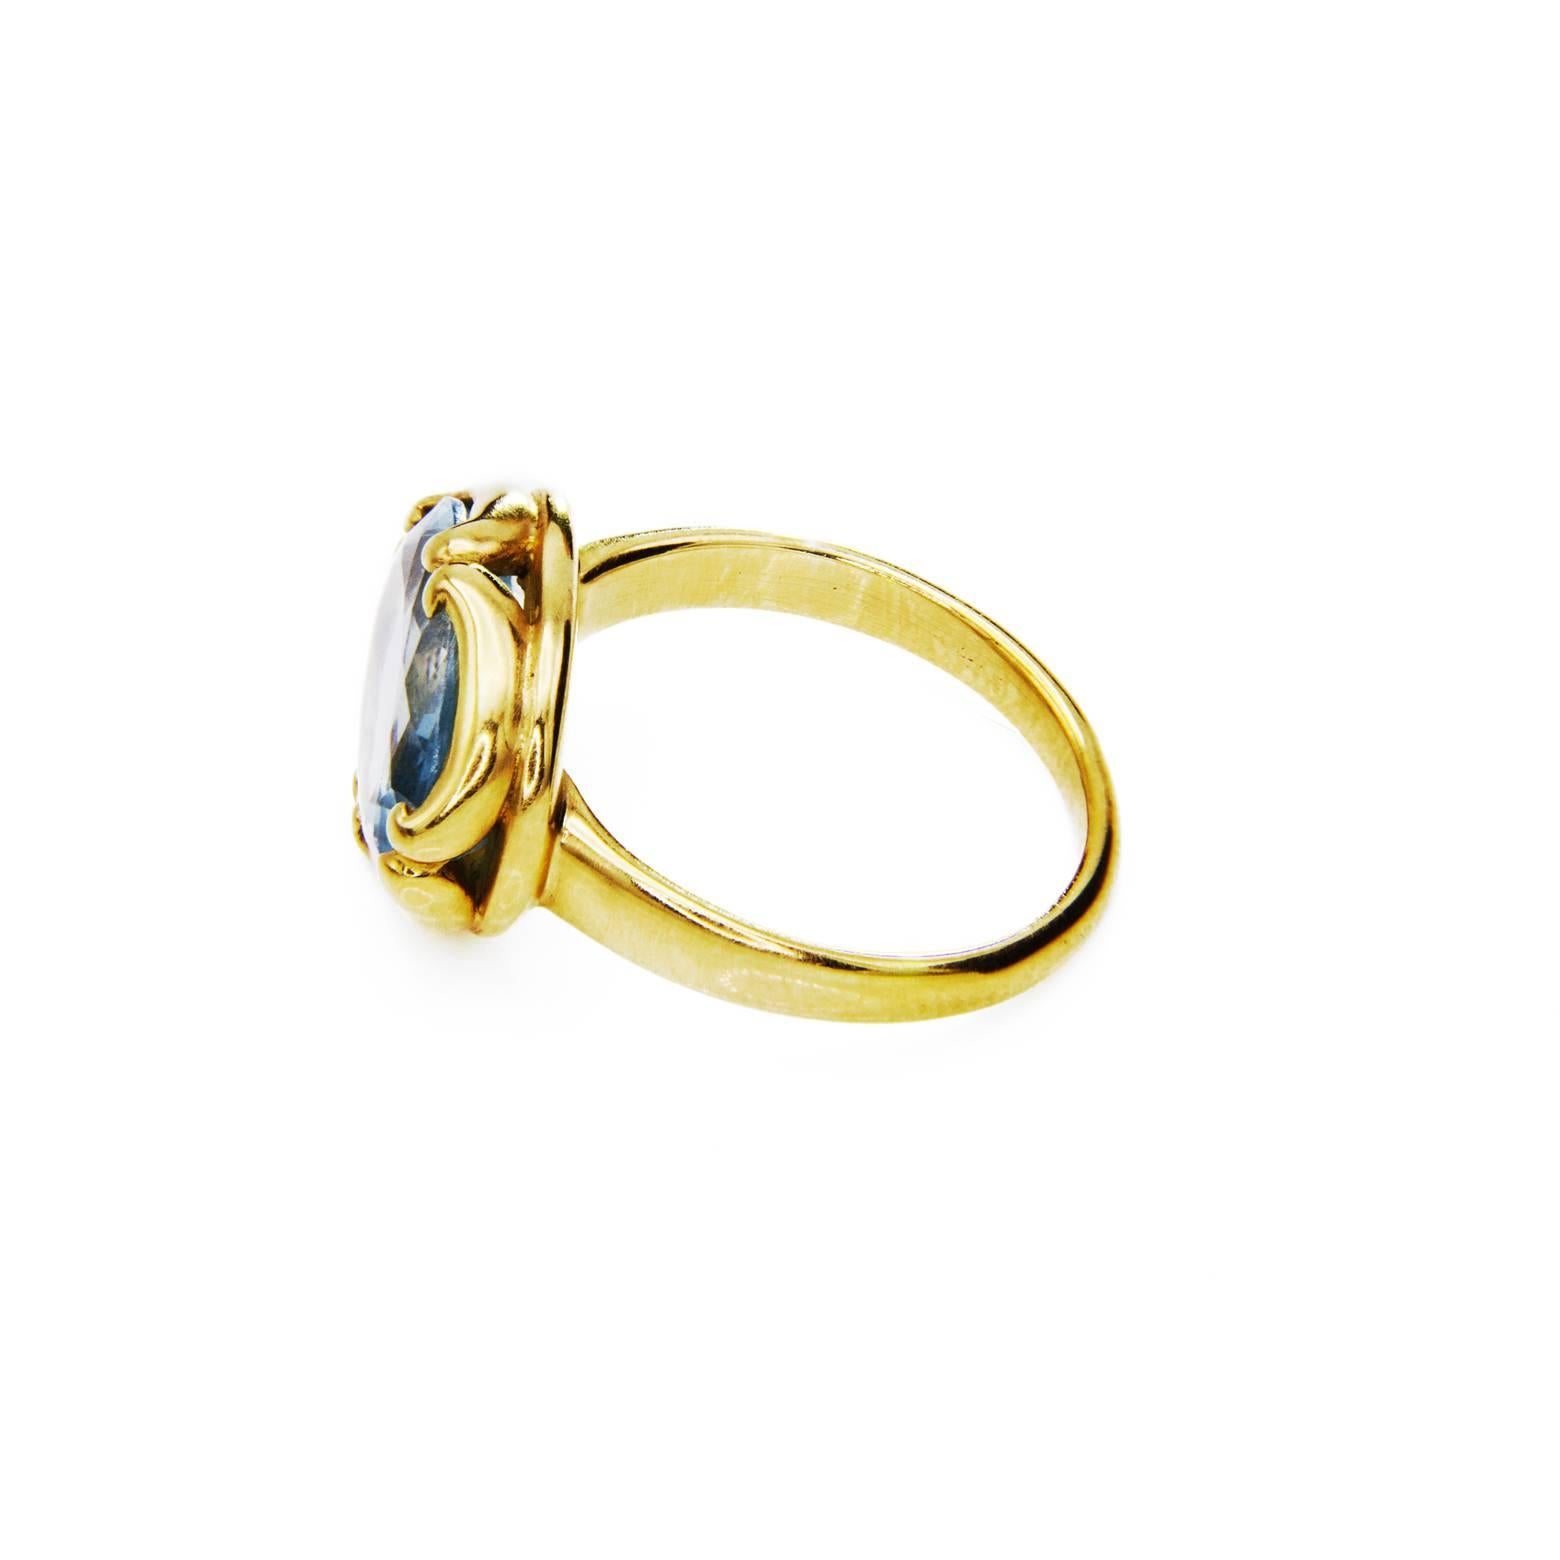 An aquamarine as brilliant as the clear blue sky. It's a large oval faceted stone set in a gorgeous 18K gold ring Byzantine Style gold ring. The design is fantastical and looks as if a  brilliant stone is set in a delicate crown.
Aquamarine oval